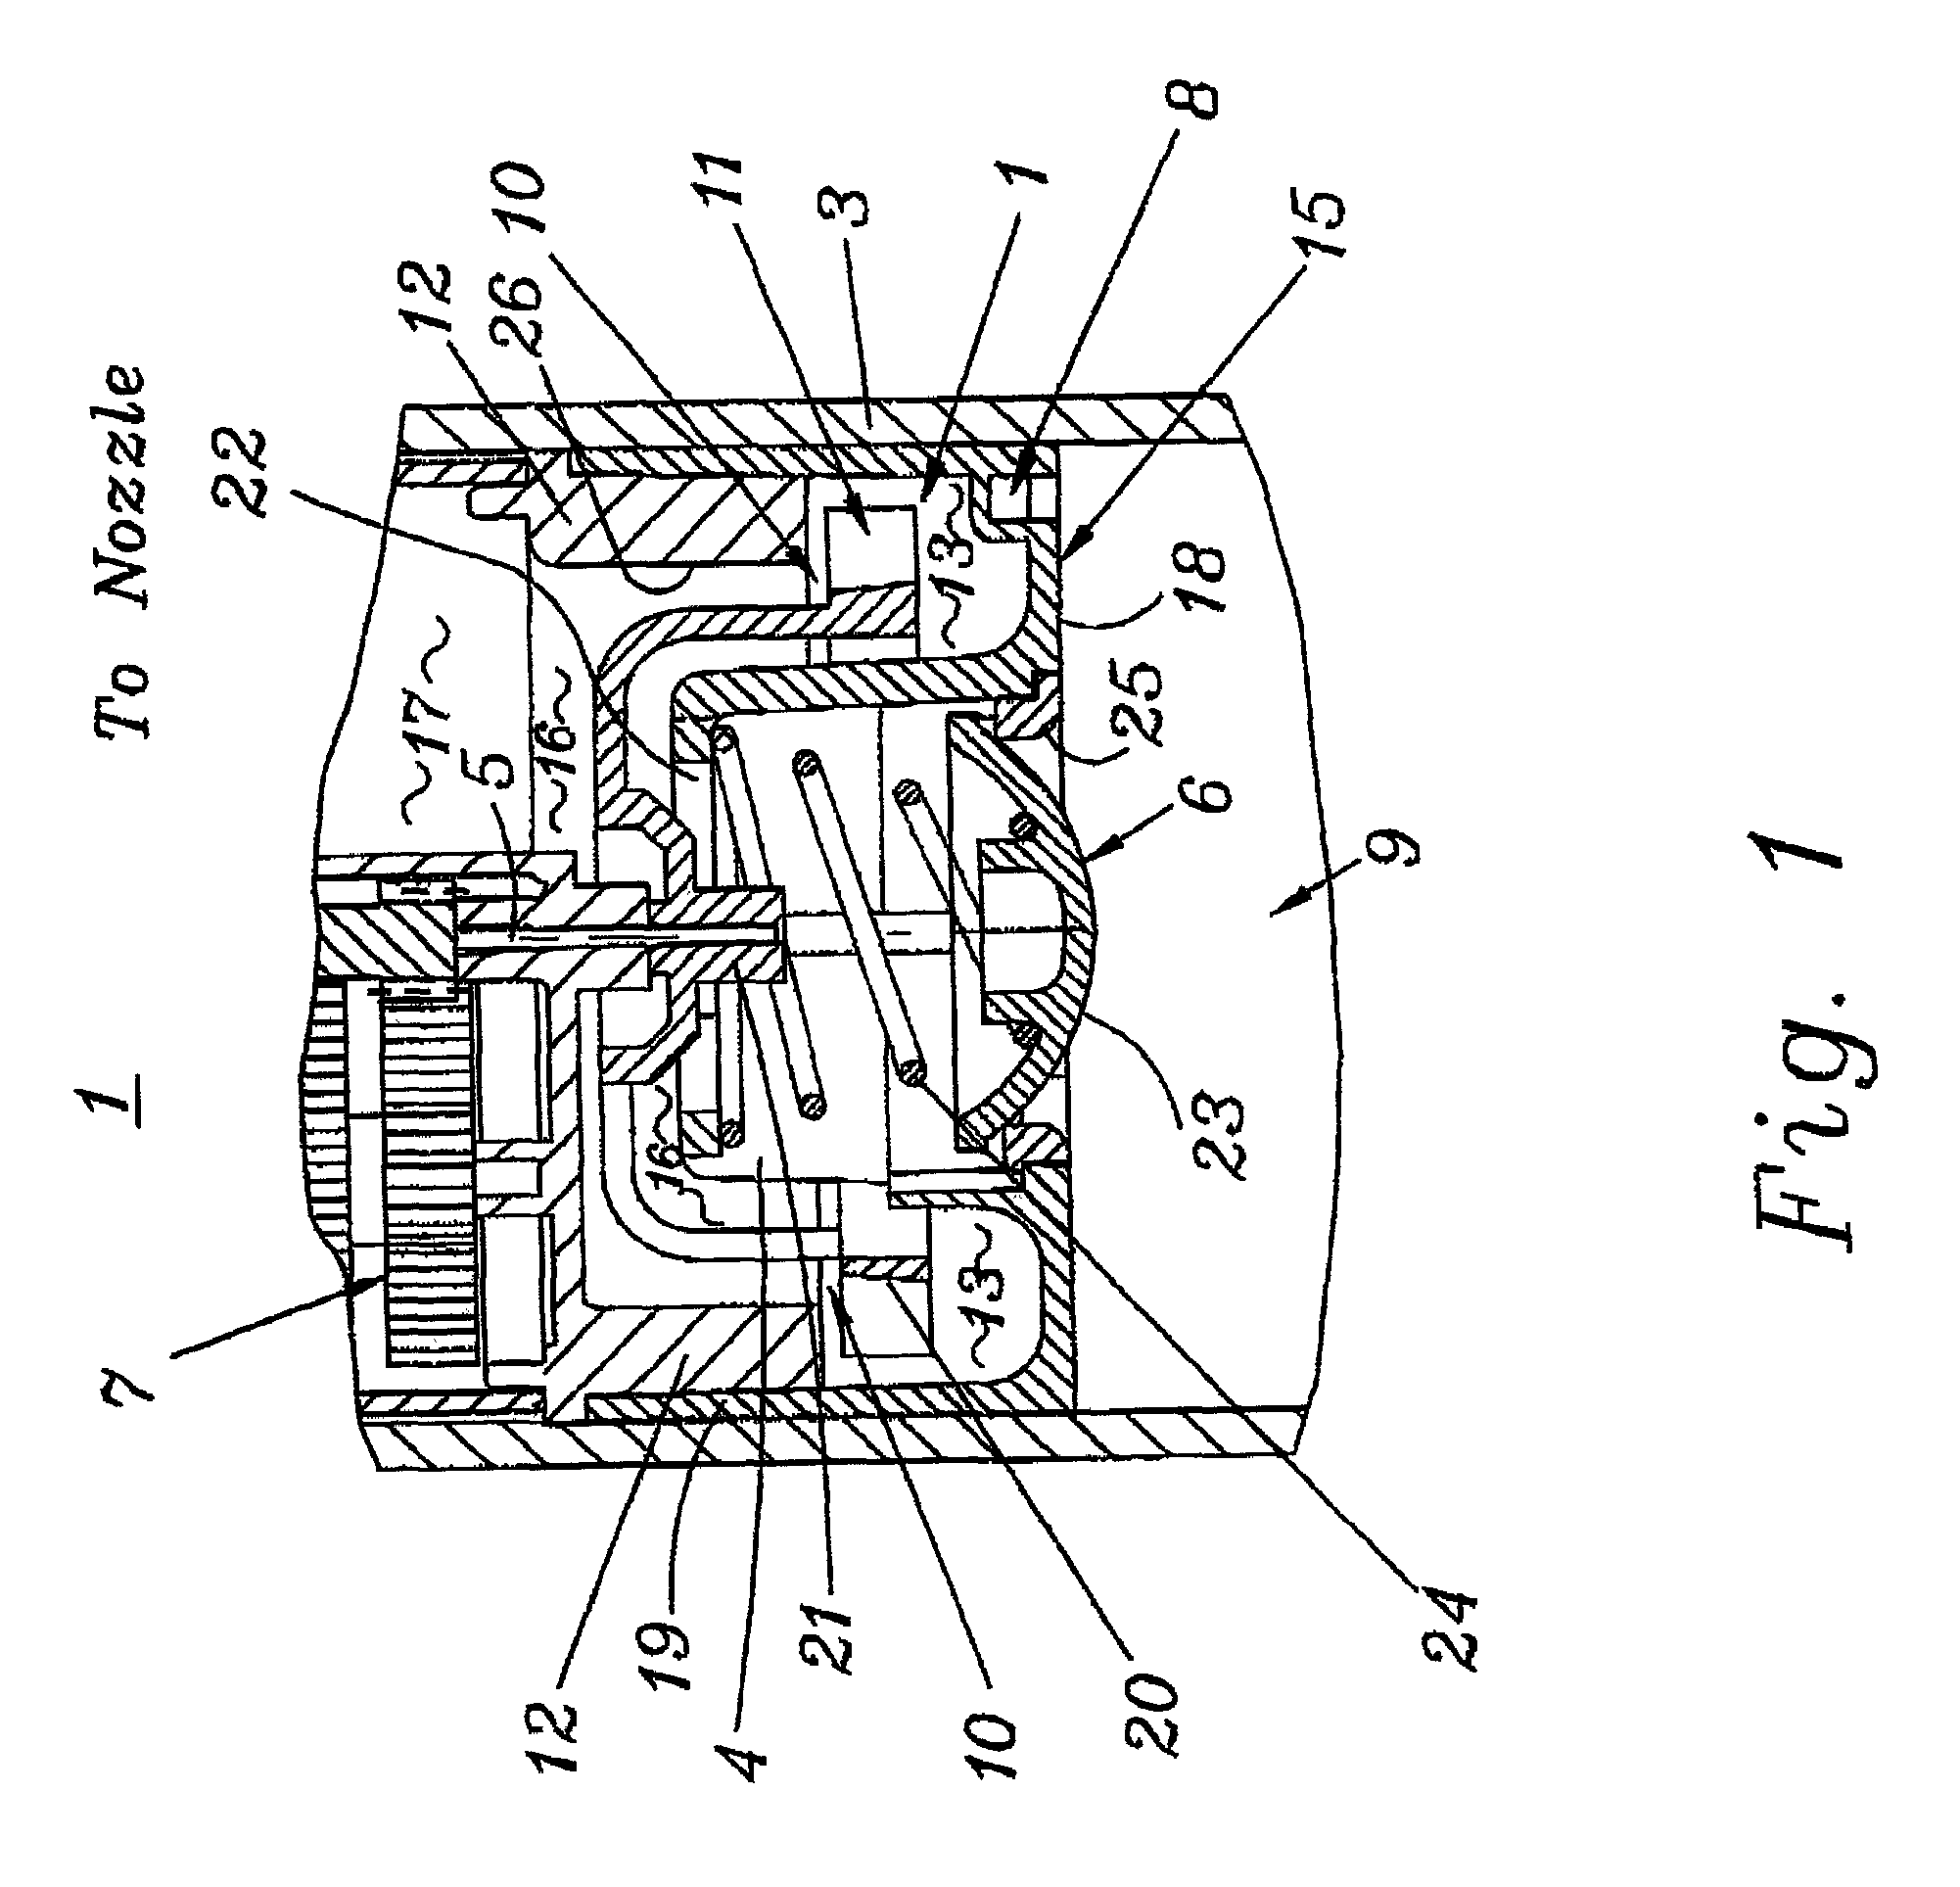 Speed limiting turbine for rotary driven sprinkler